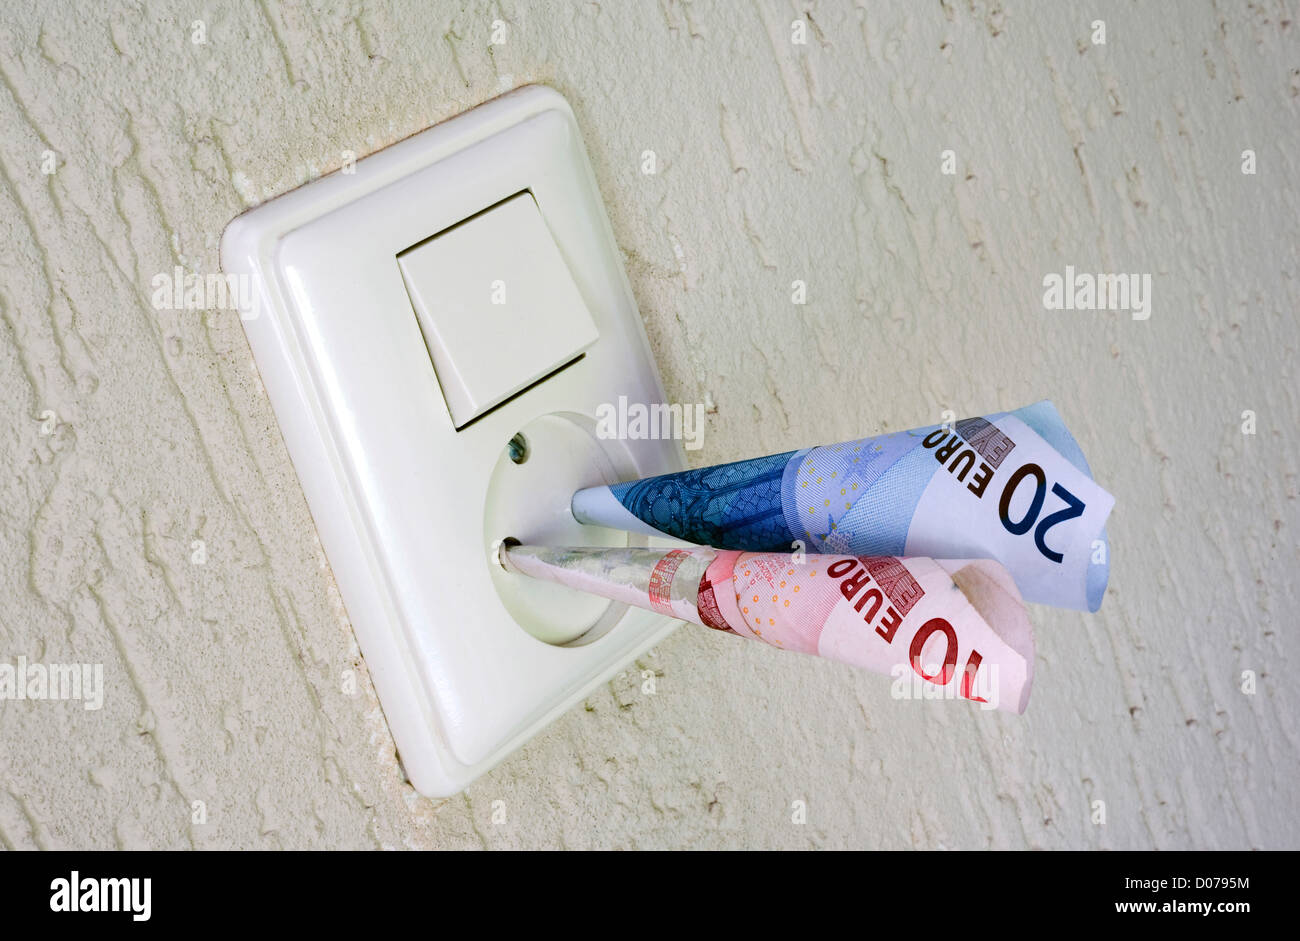 Energy prices are still rising in europe Stock Photo